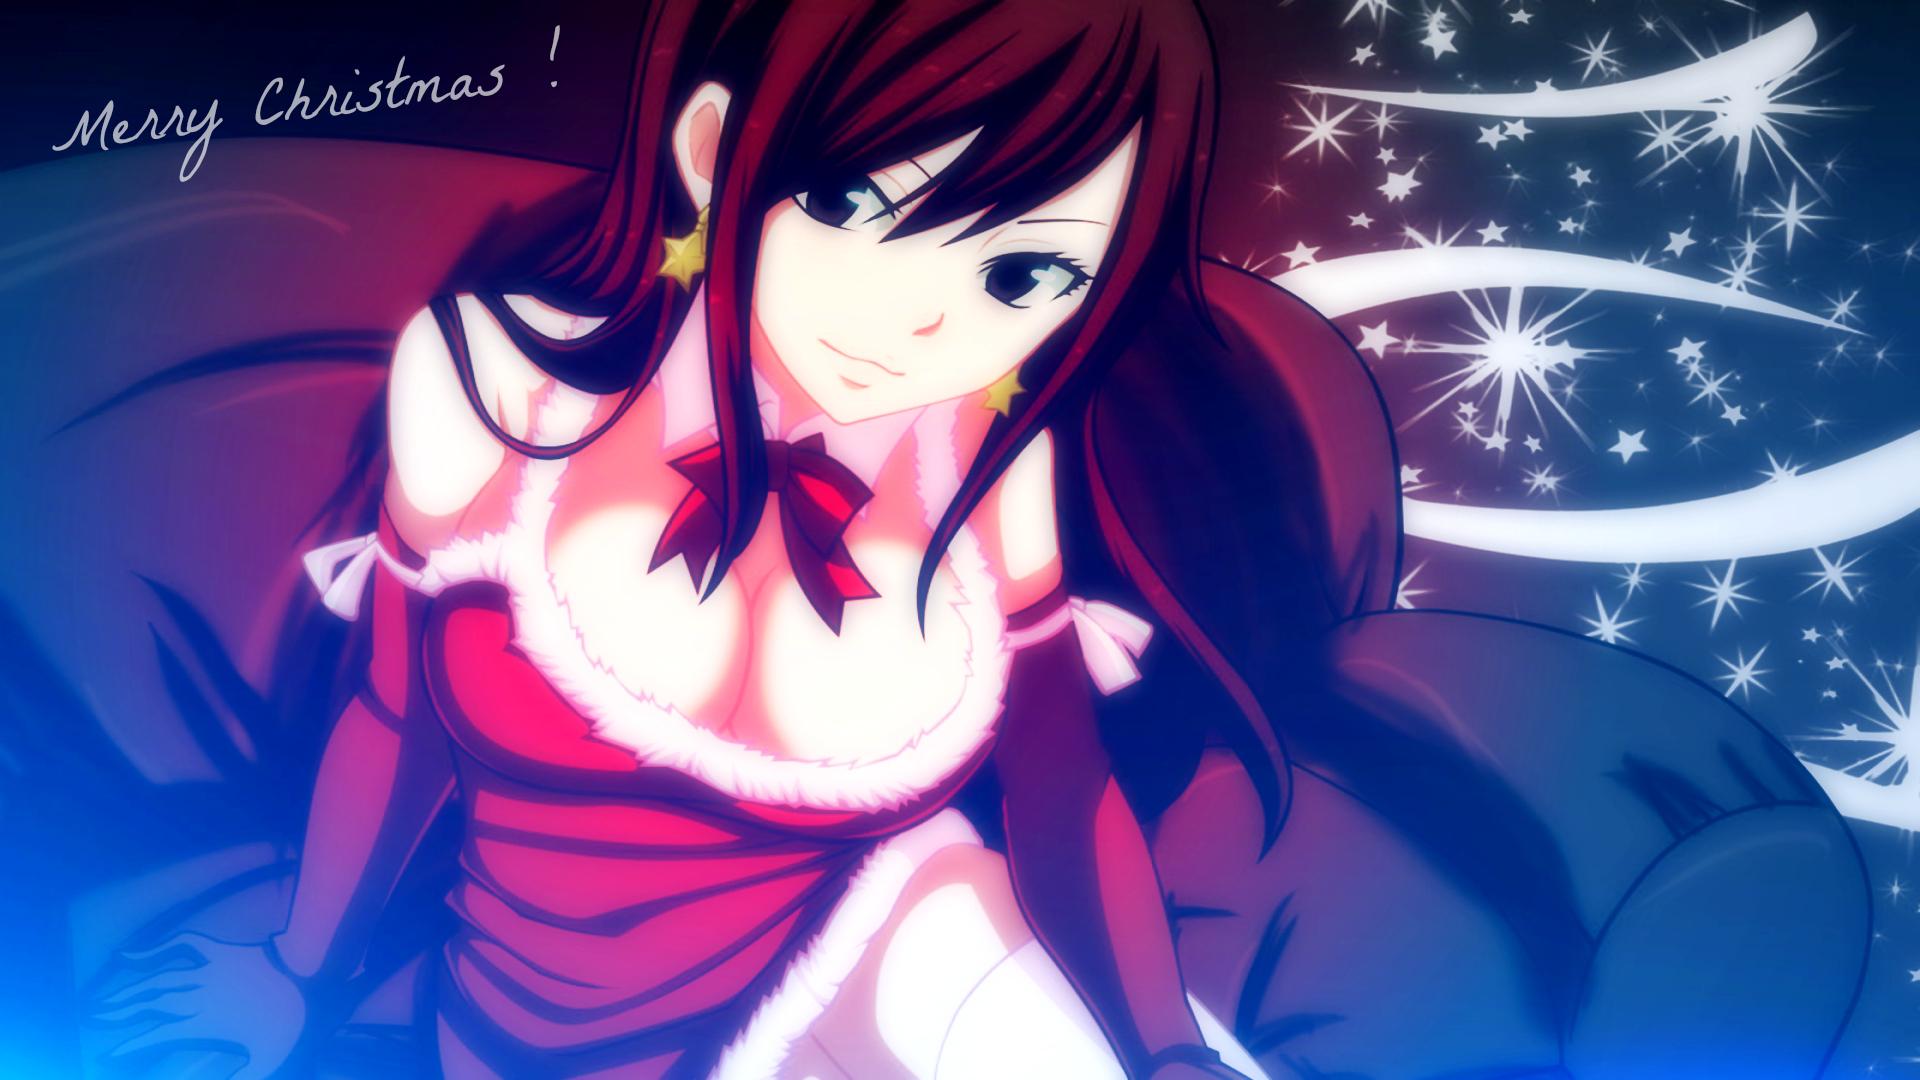 Erza Wish You A Merry Christmas HD Wallpaper. Background